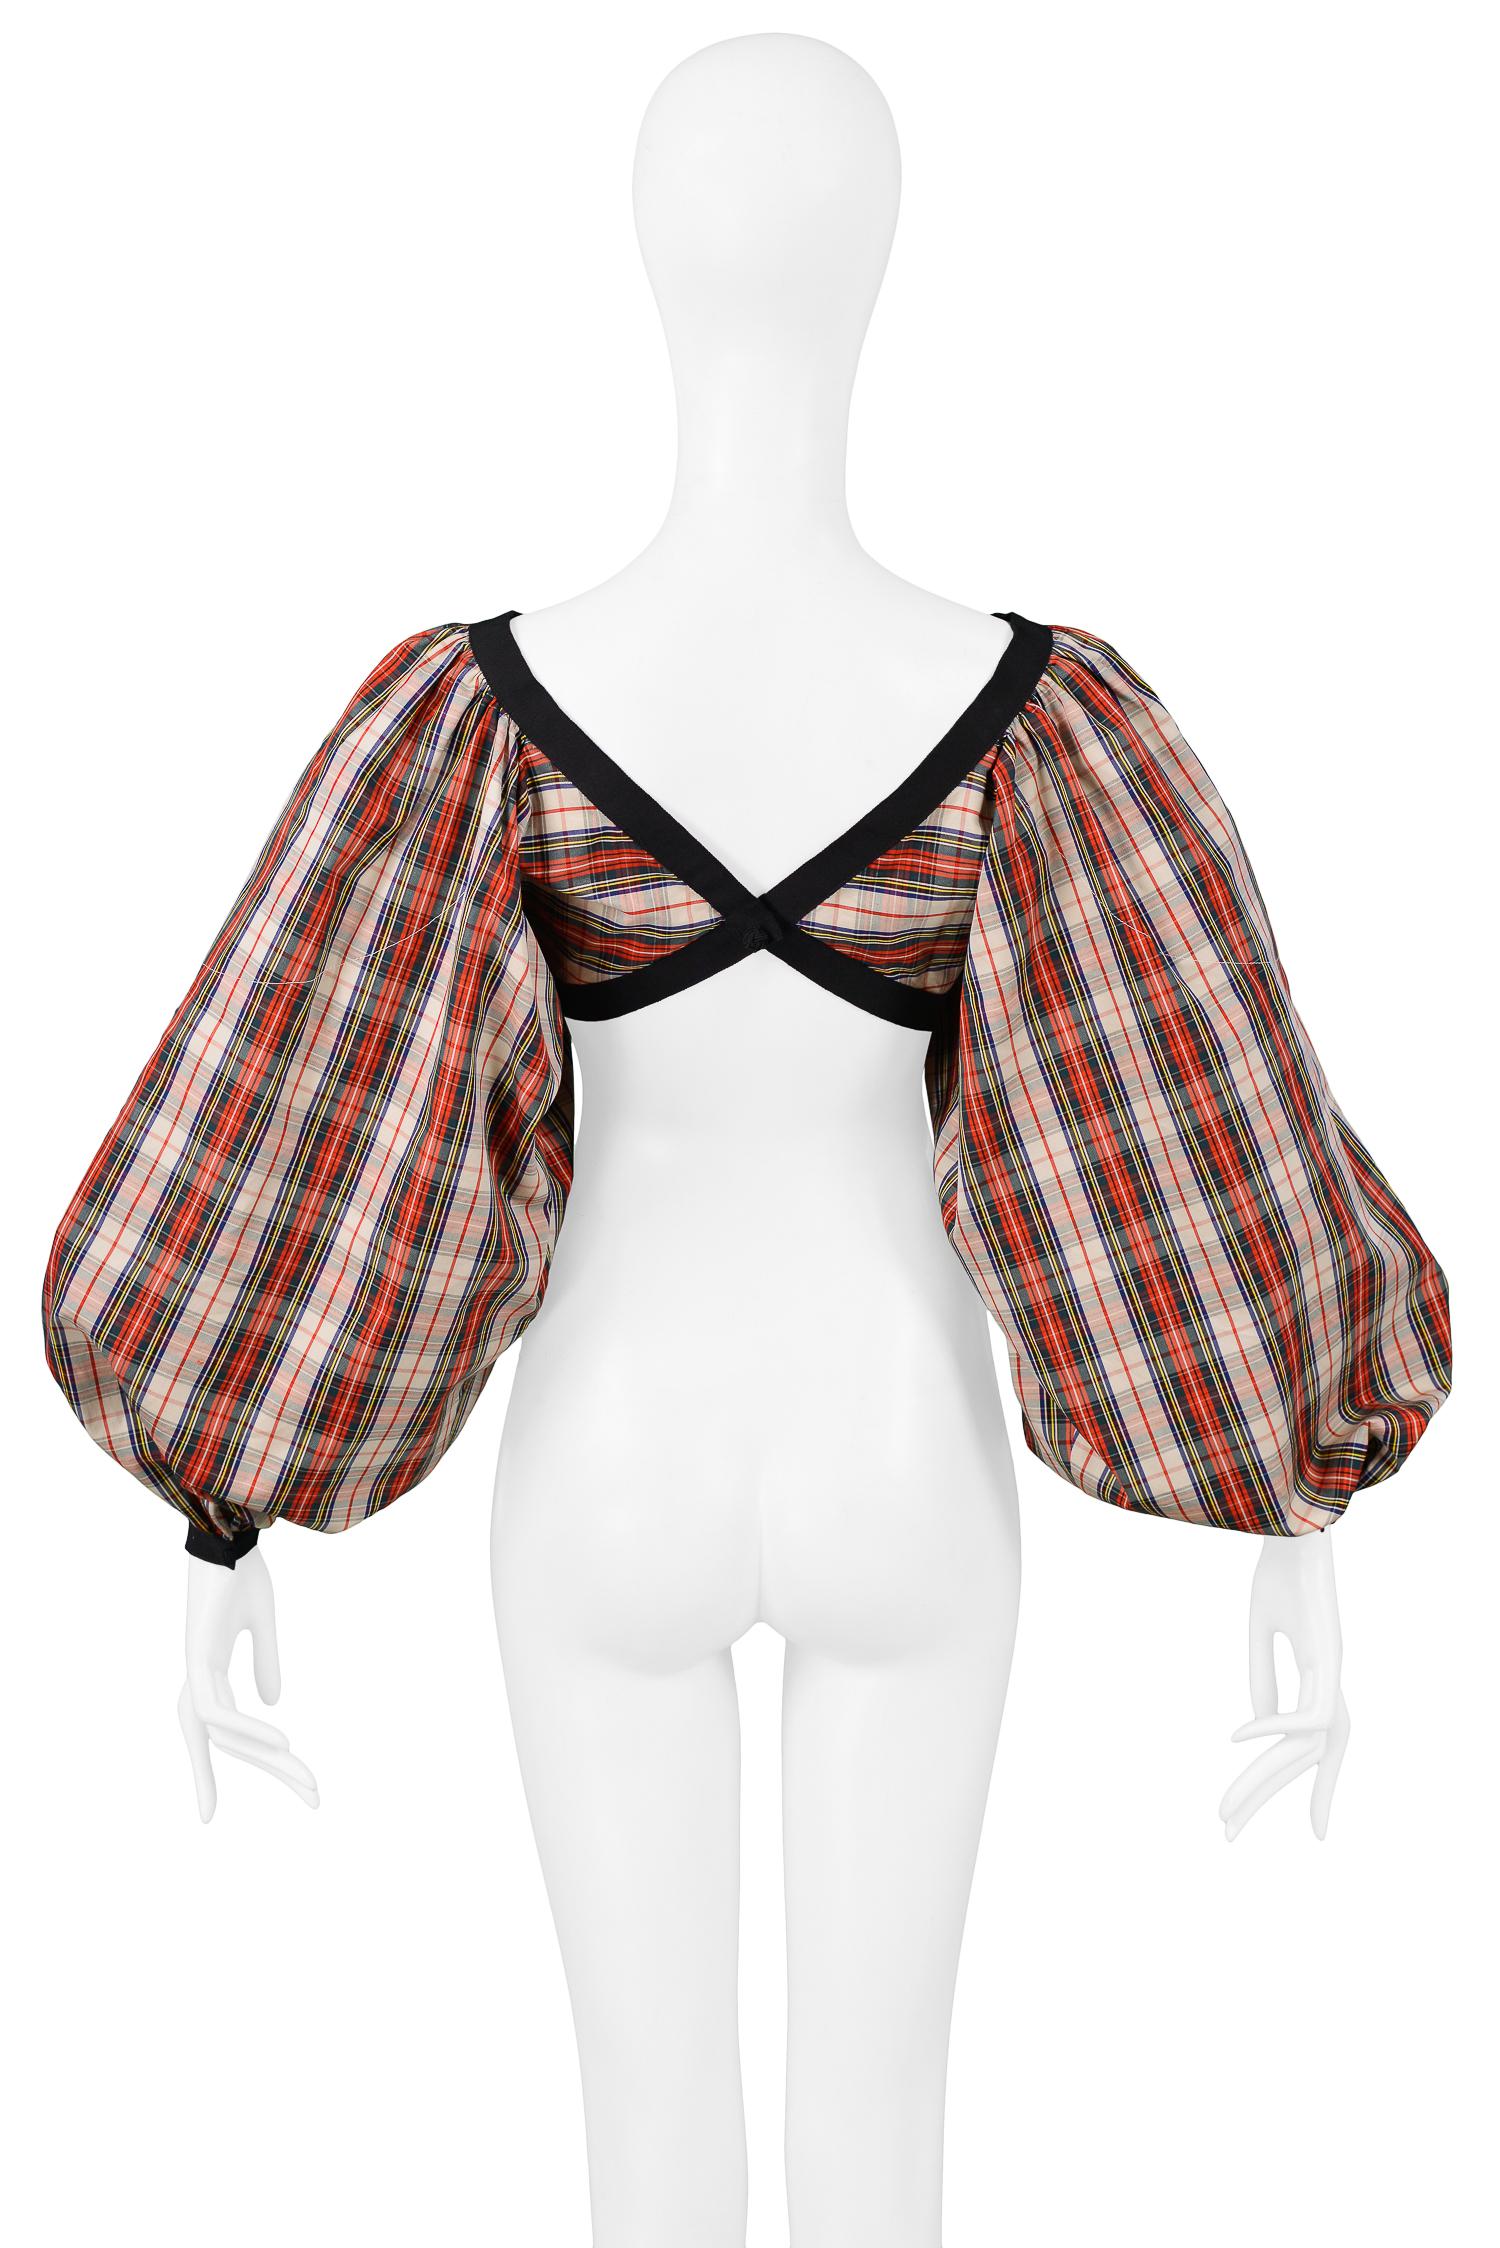 Issac Mizrahi Red Plaid Crop Party Top In Excellent Condition For Sale In Los Angeles, CA